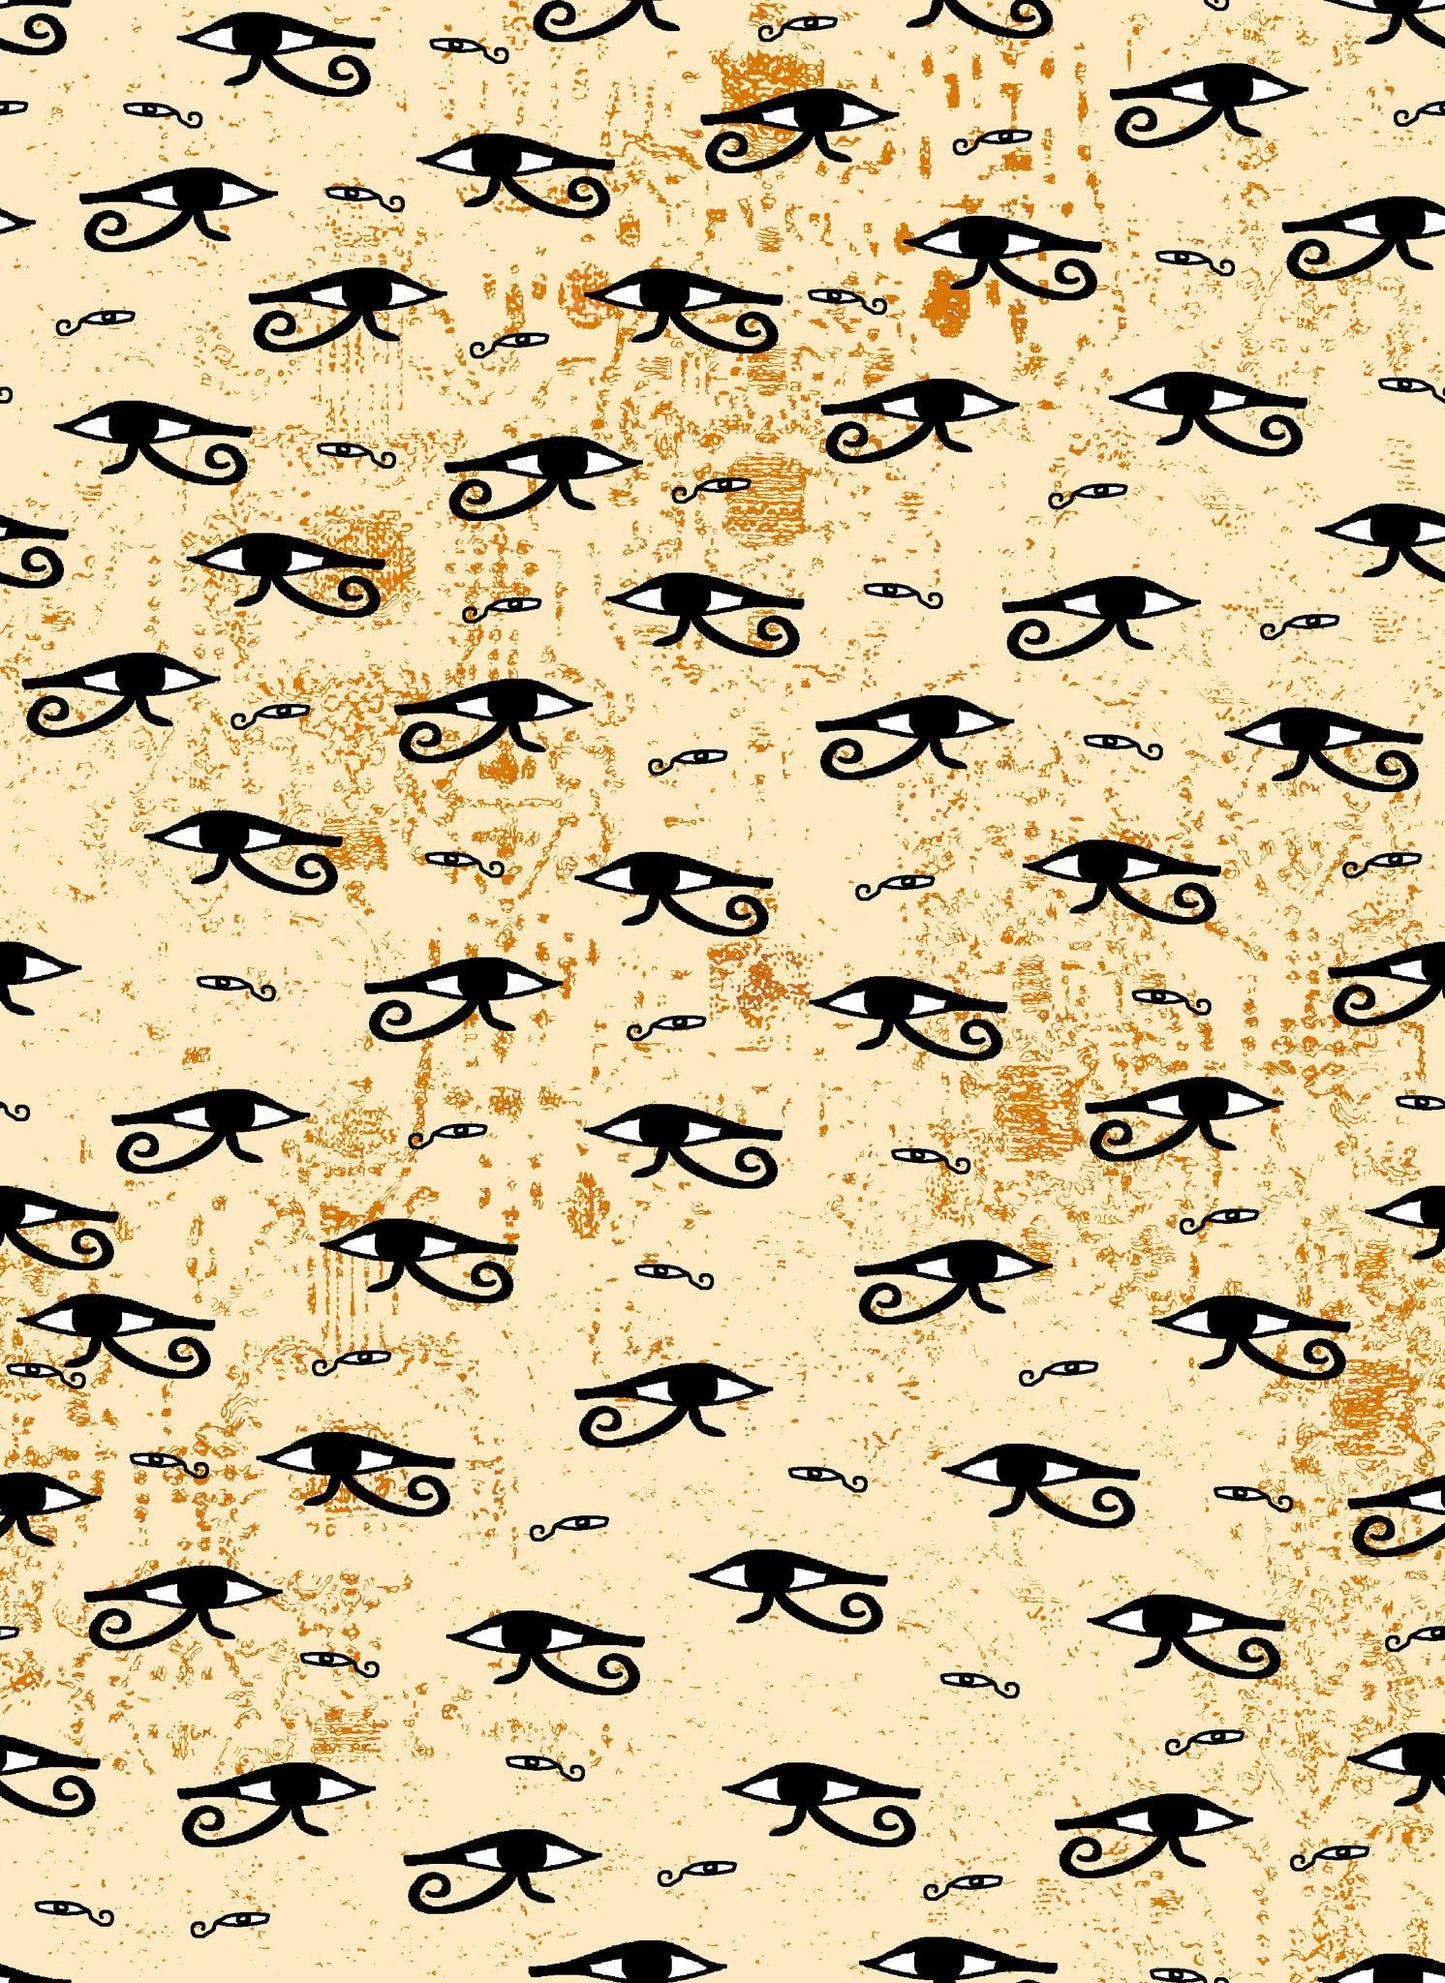 The Eye of Egypt Black and White coloured Egyptian Eyes on Cream 4501-404 Digitally Printed Cotton Woven Fabric